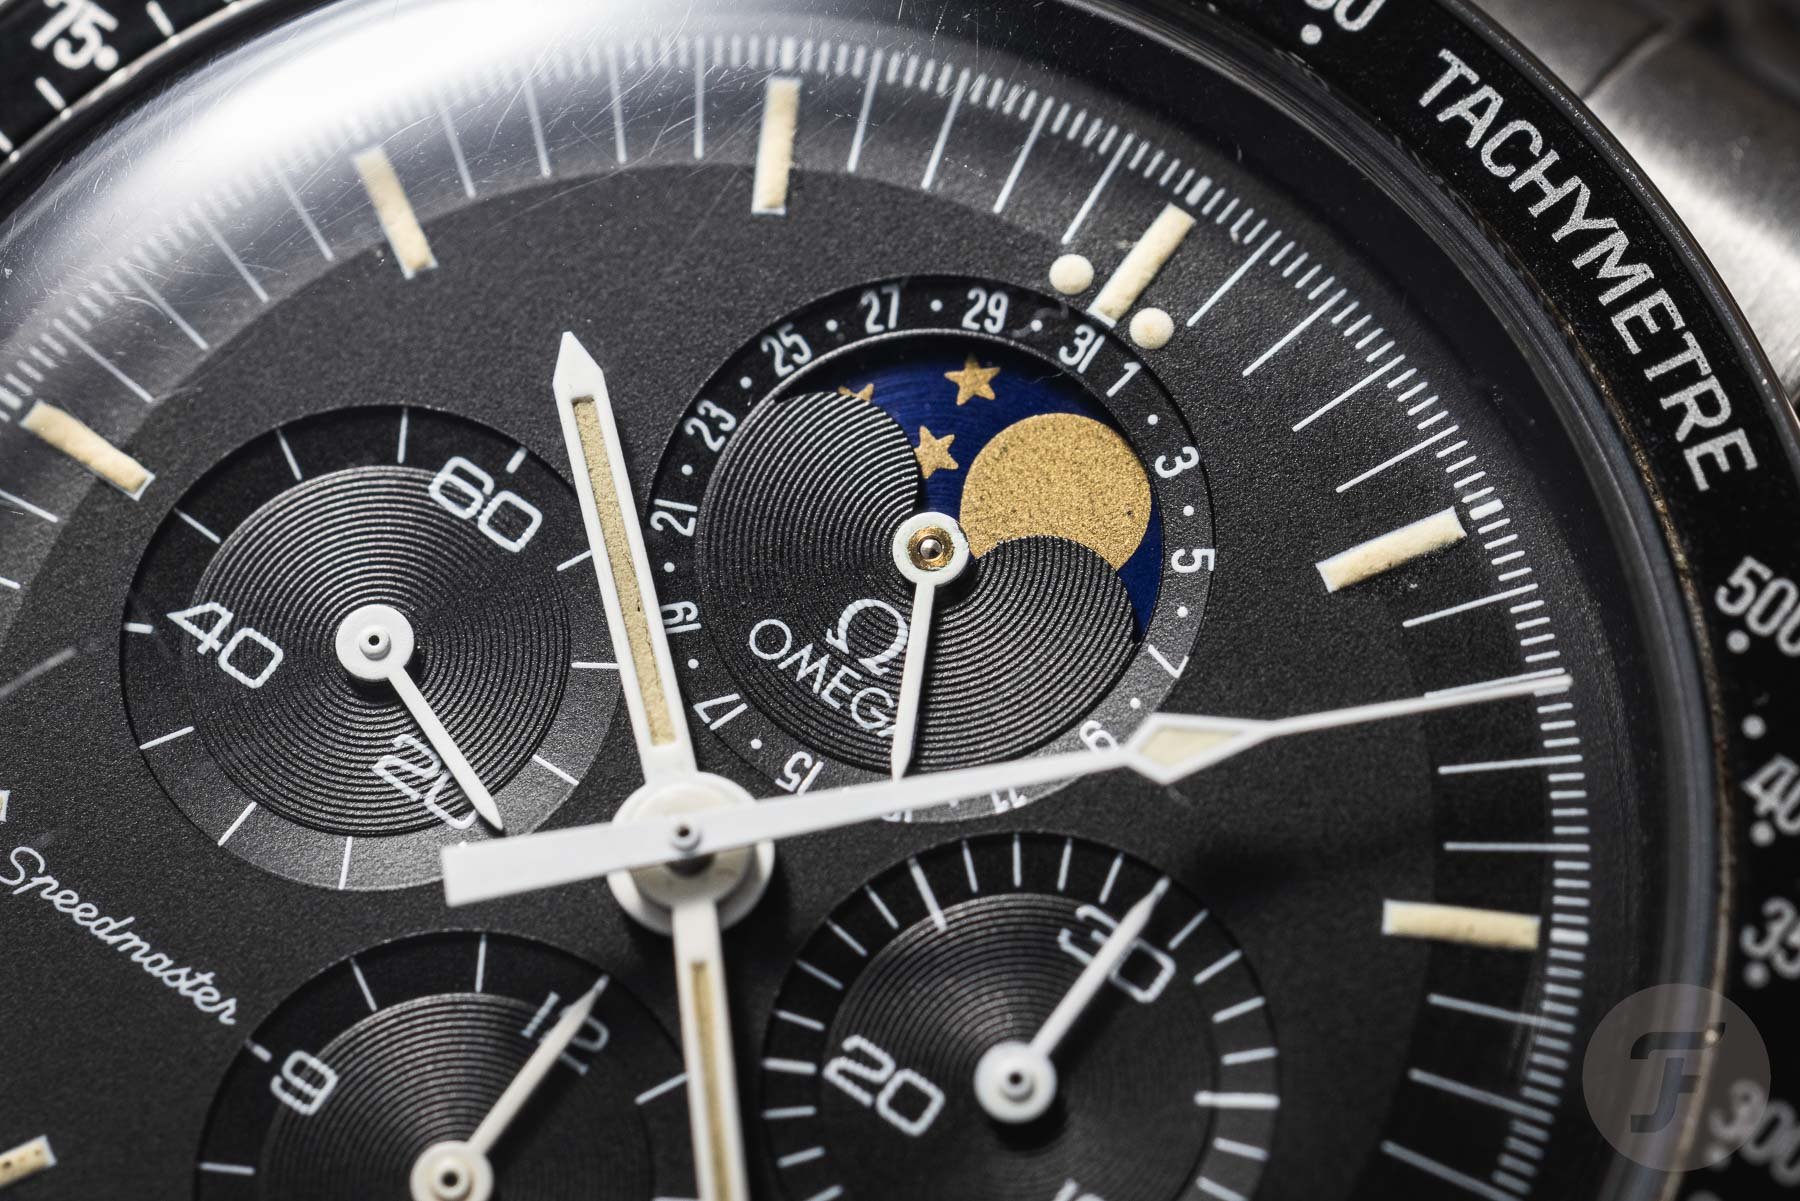 Omega SpeedyMoon 345.0809 dial close-up